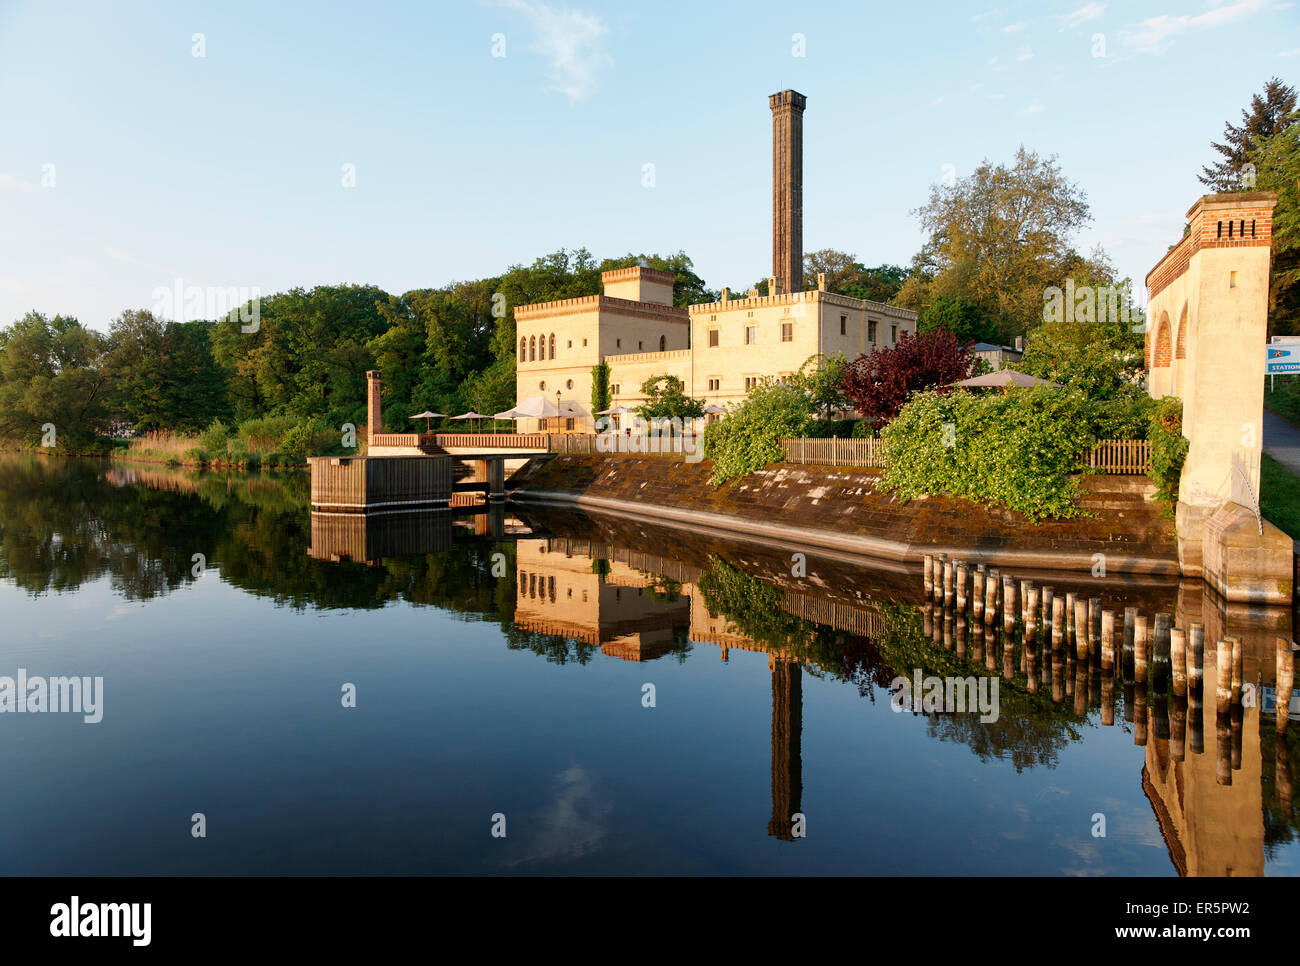 Lake with reflection, Jungfernsee, Dairy in the New Garden, Potsdam, Brandenburg, Germany Stock Photo